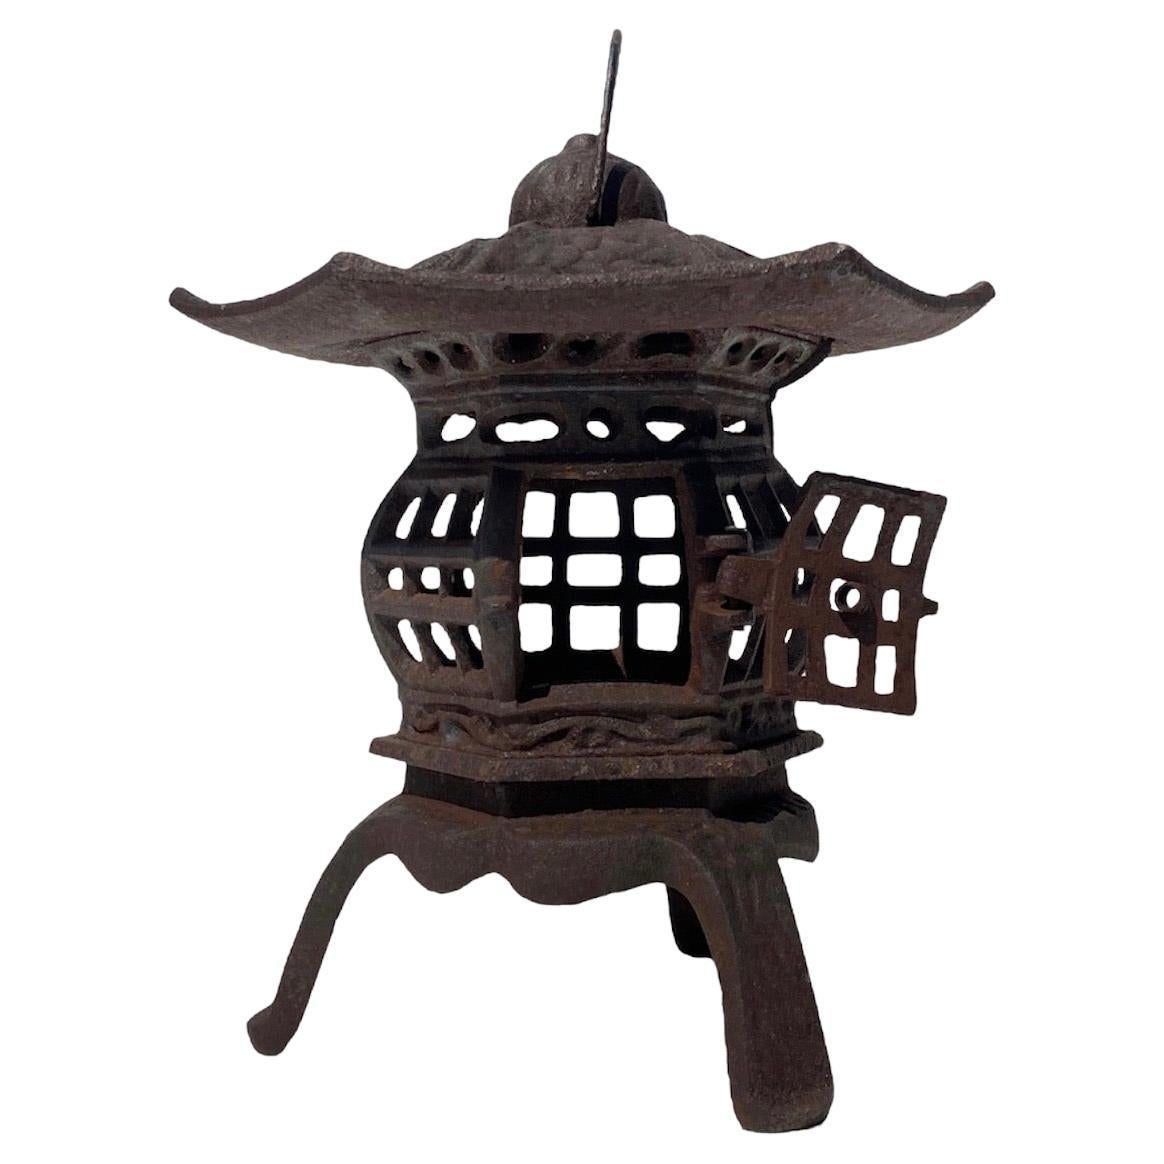 Cast iron garden pagoda lantern from Japan, aged beautifully and will work well both inside or in the garden setting. 
Very special.